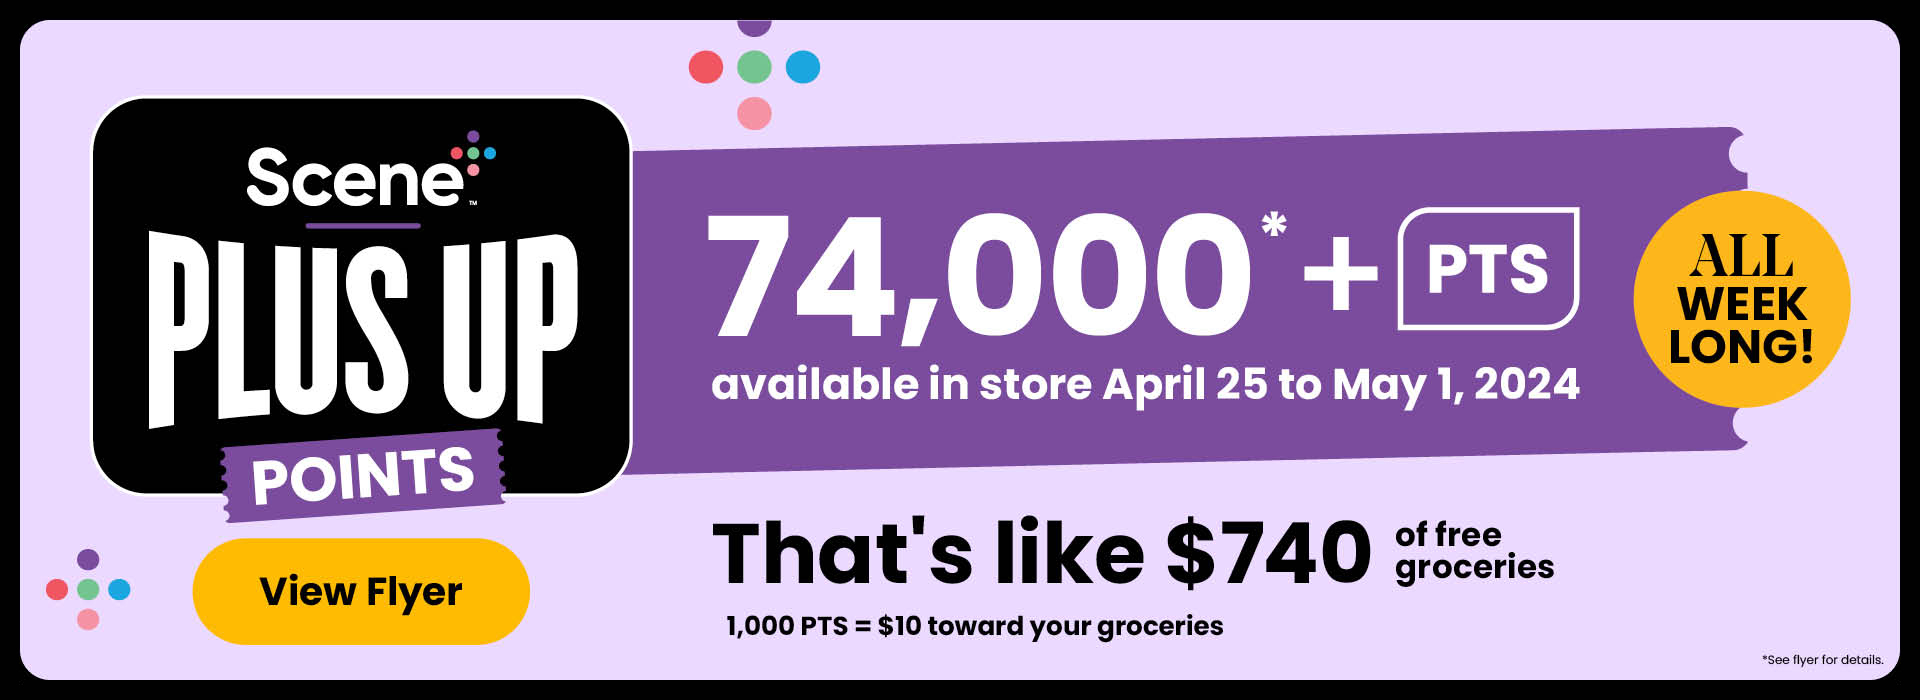 All Week Long! Scene+ Plus Up Points. Over 74,000 PTS available in-store. That's like $740 toward your groceries. 1,000 PTS = $10 toward your groceres. See flyer or in-store for participating products.